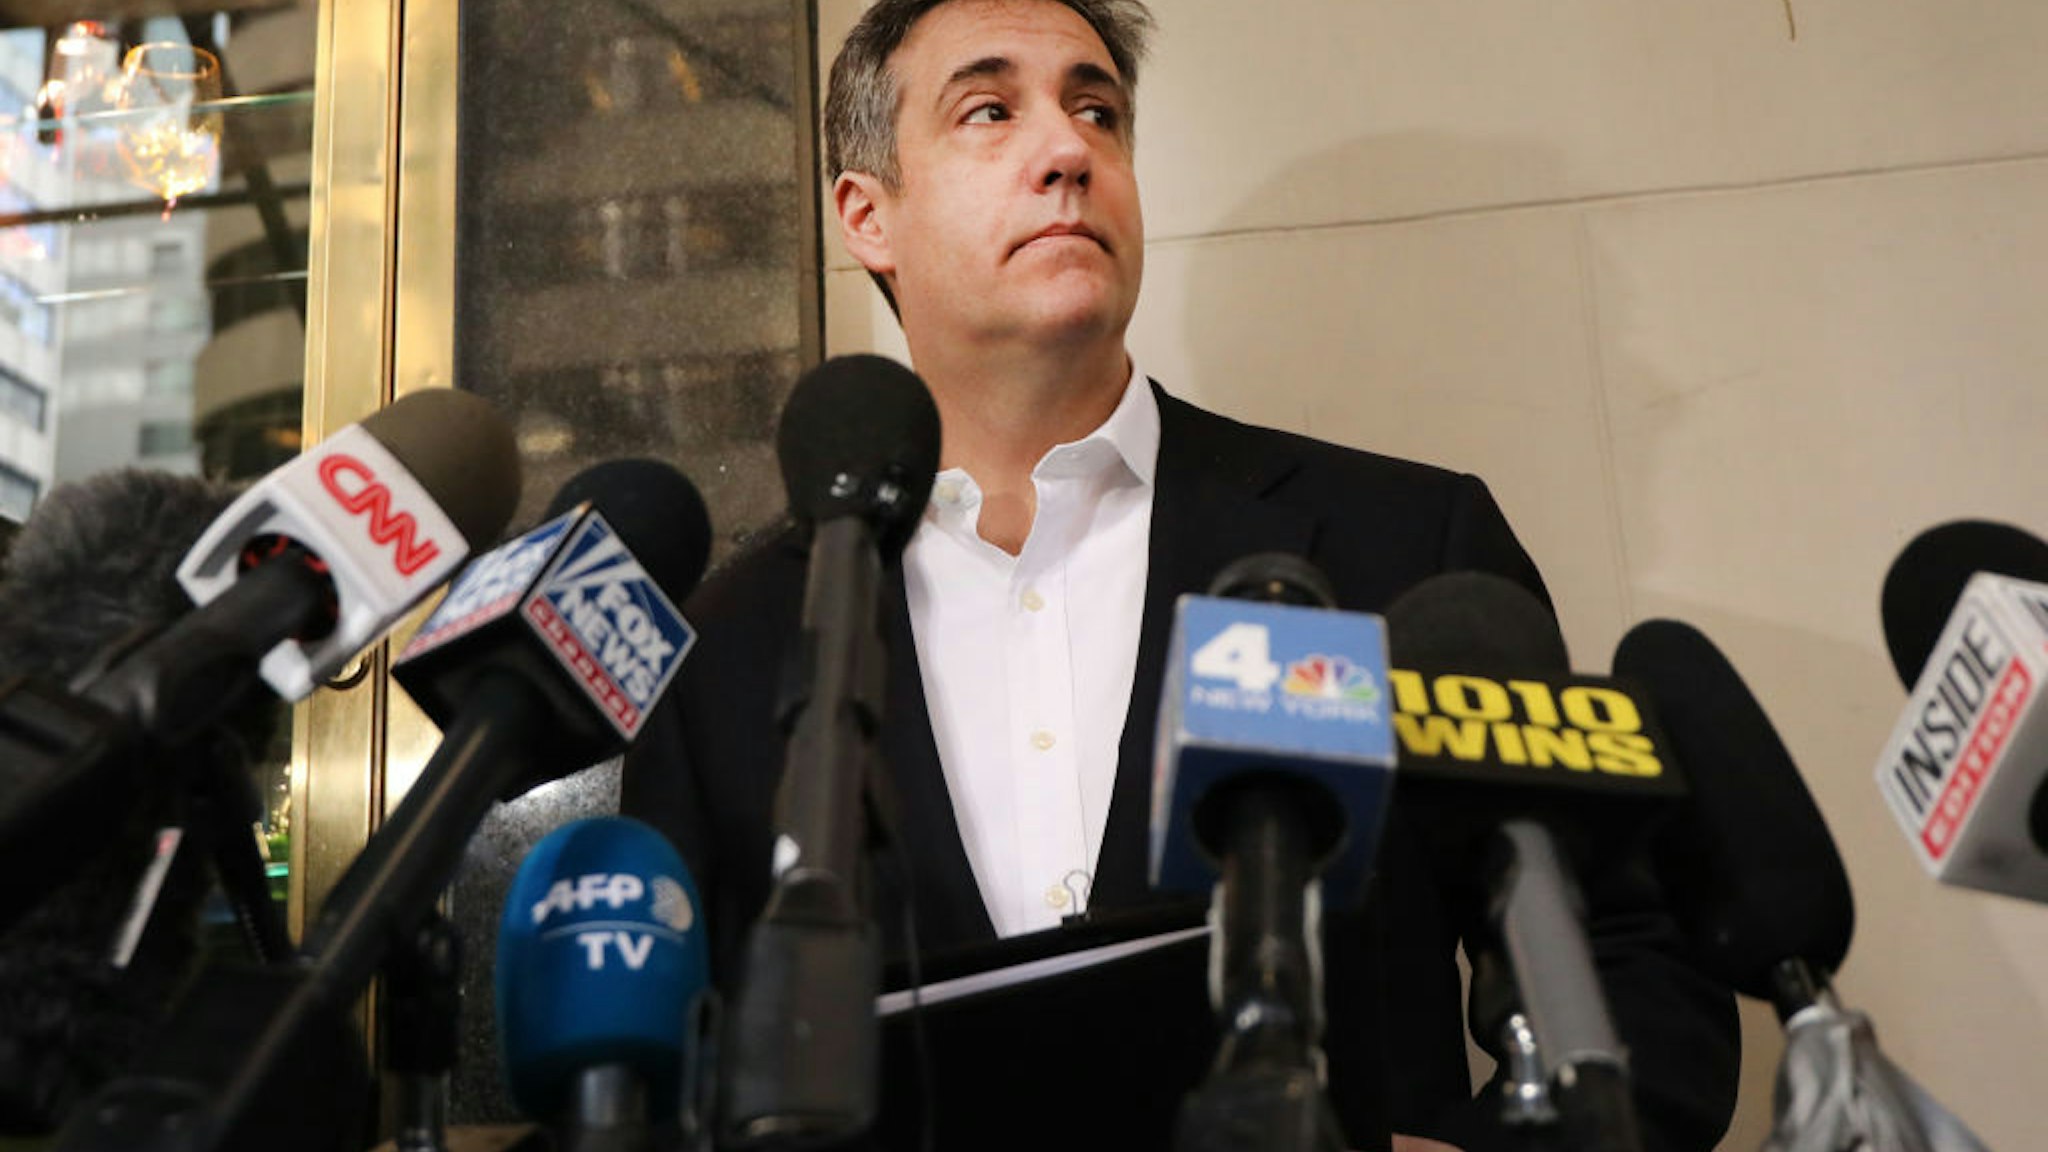 Michael Cohen, the former personal attorney to President Donald Trump, speaks to the media before departing his Manhattan apartment for prison on May 06, 2019 in New York City.